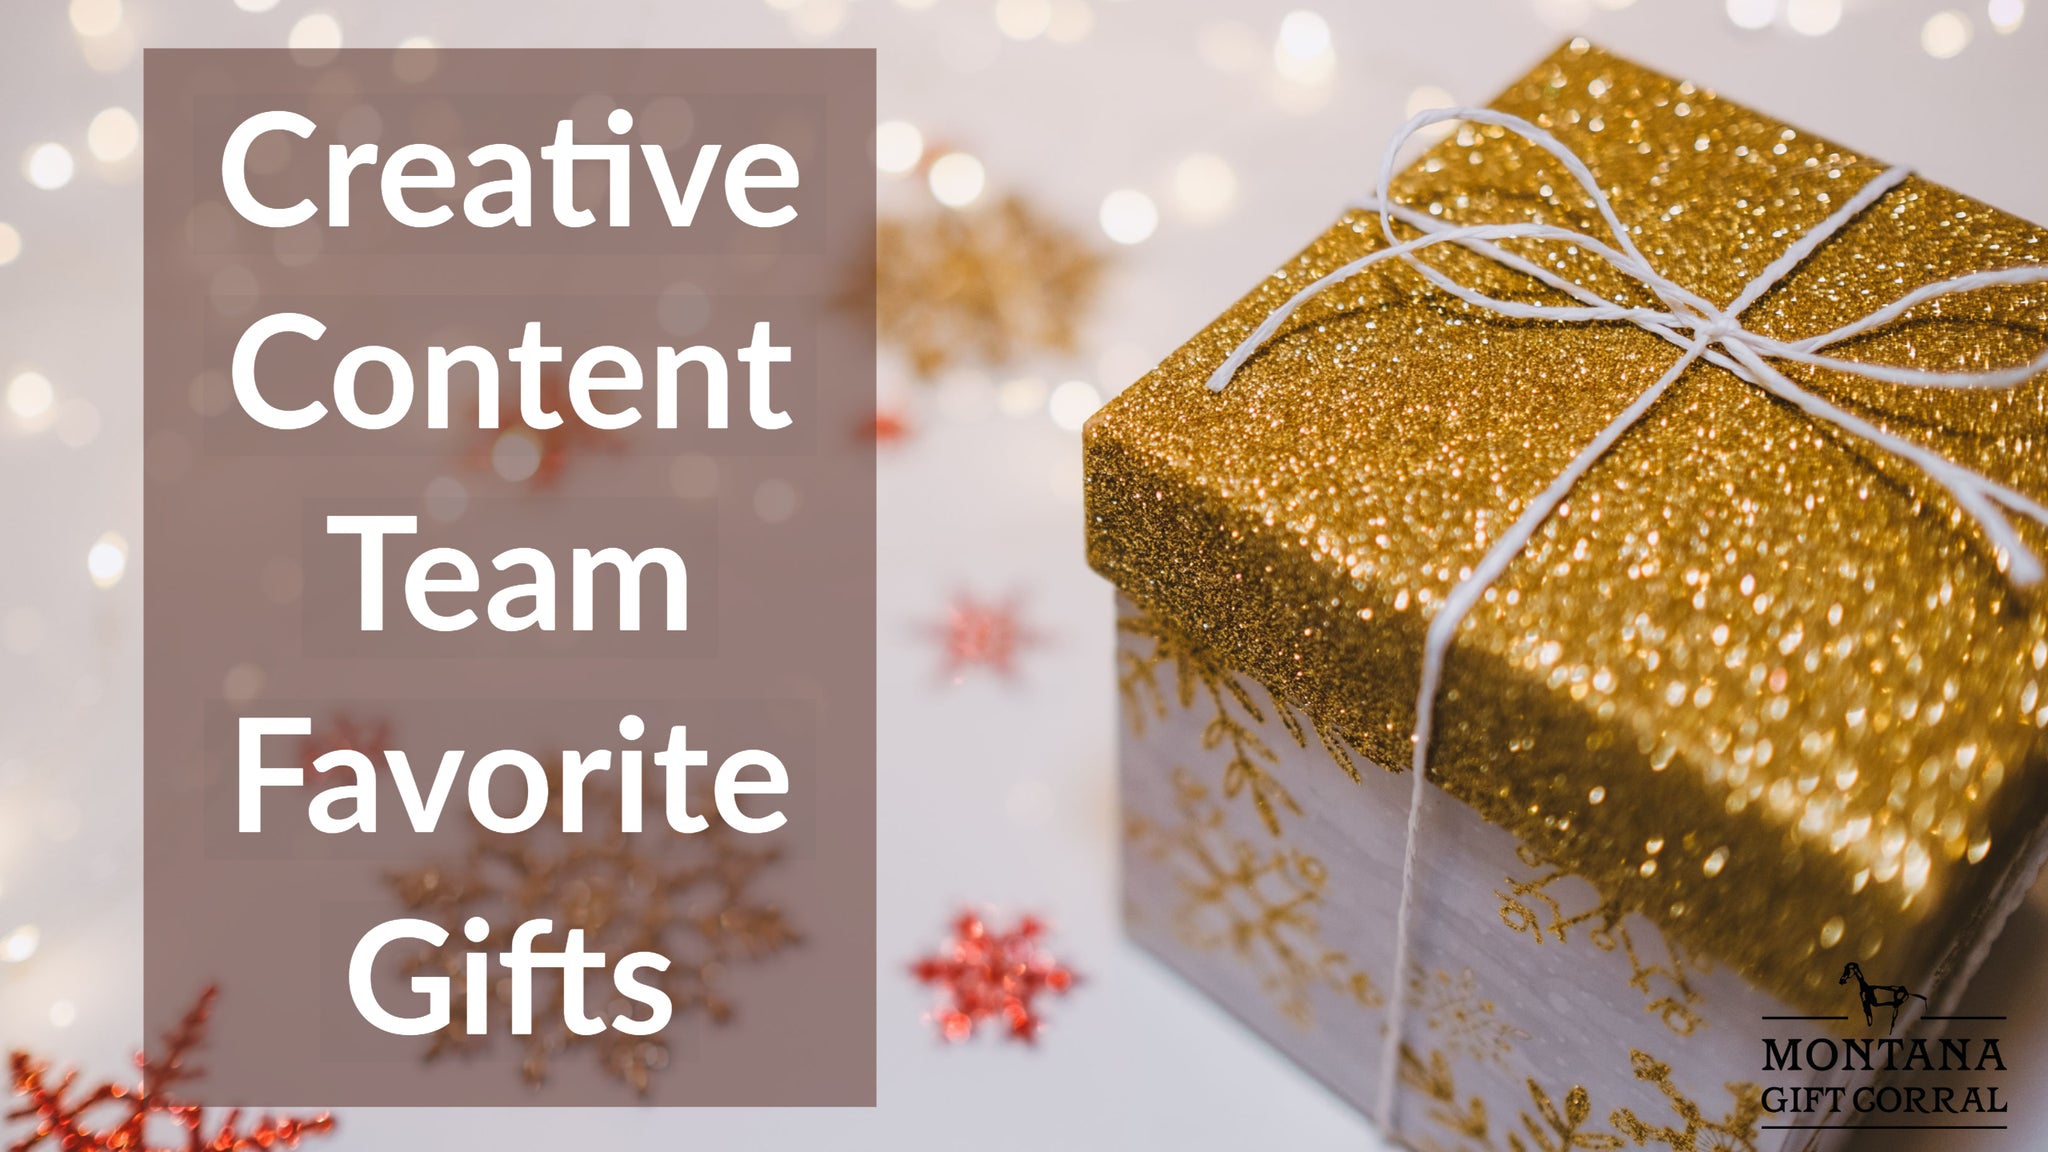 Creative Content Team Favorite Gifts